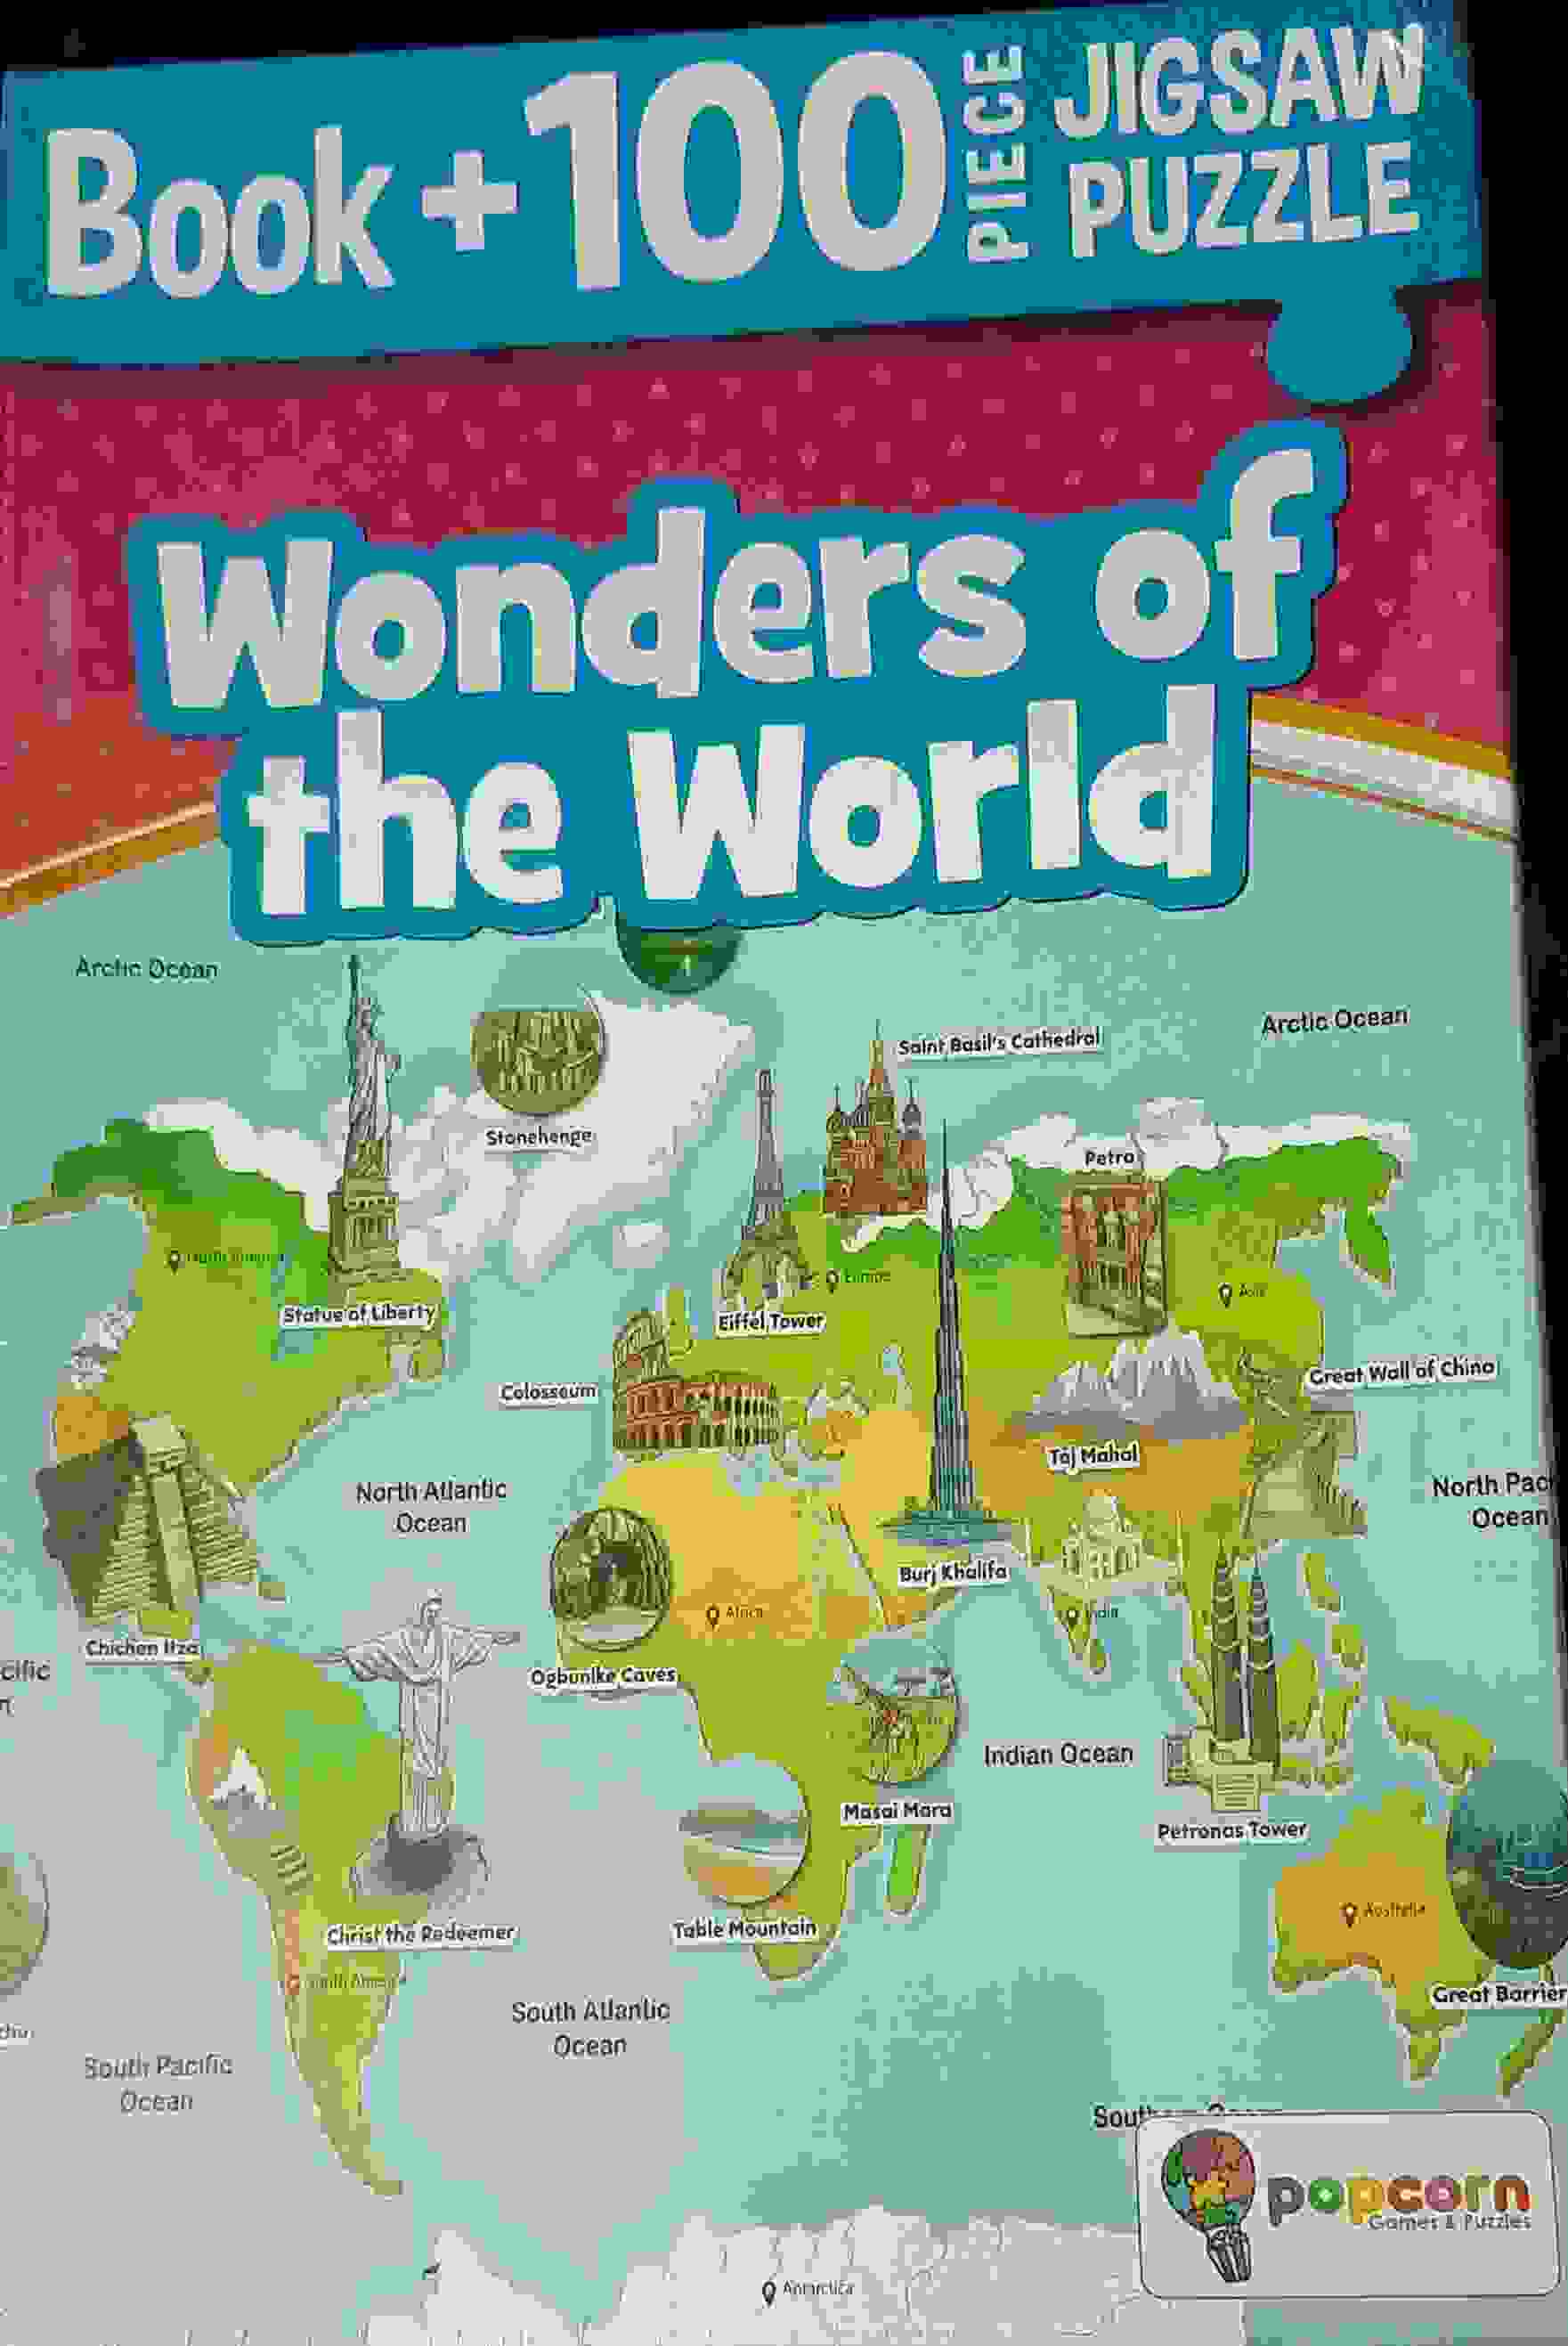 Wonders of the world (Book + 100 Piece - Jigsaw Puzzle)